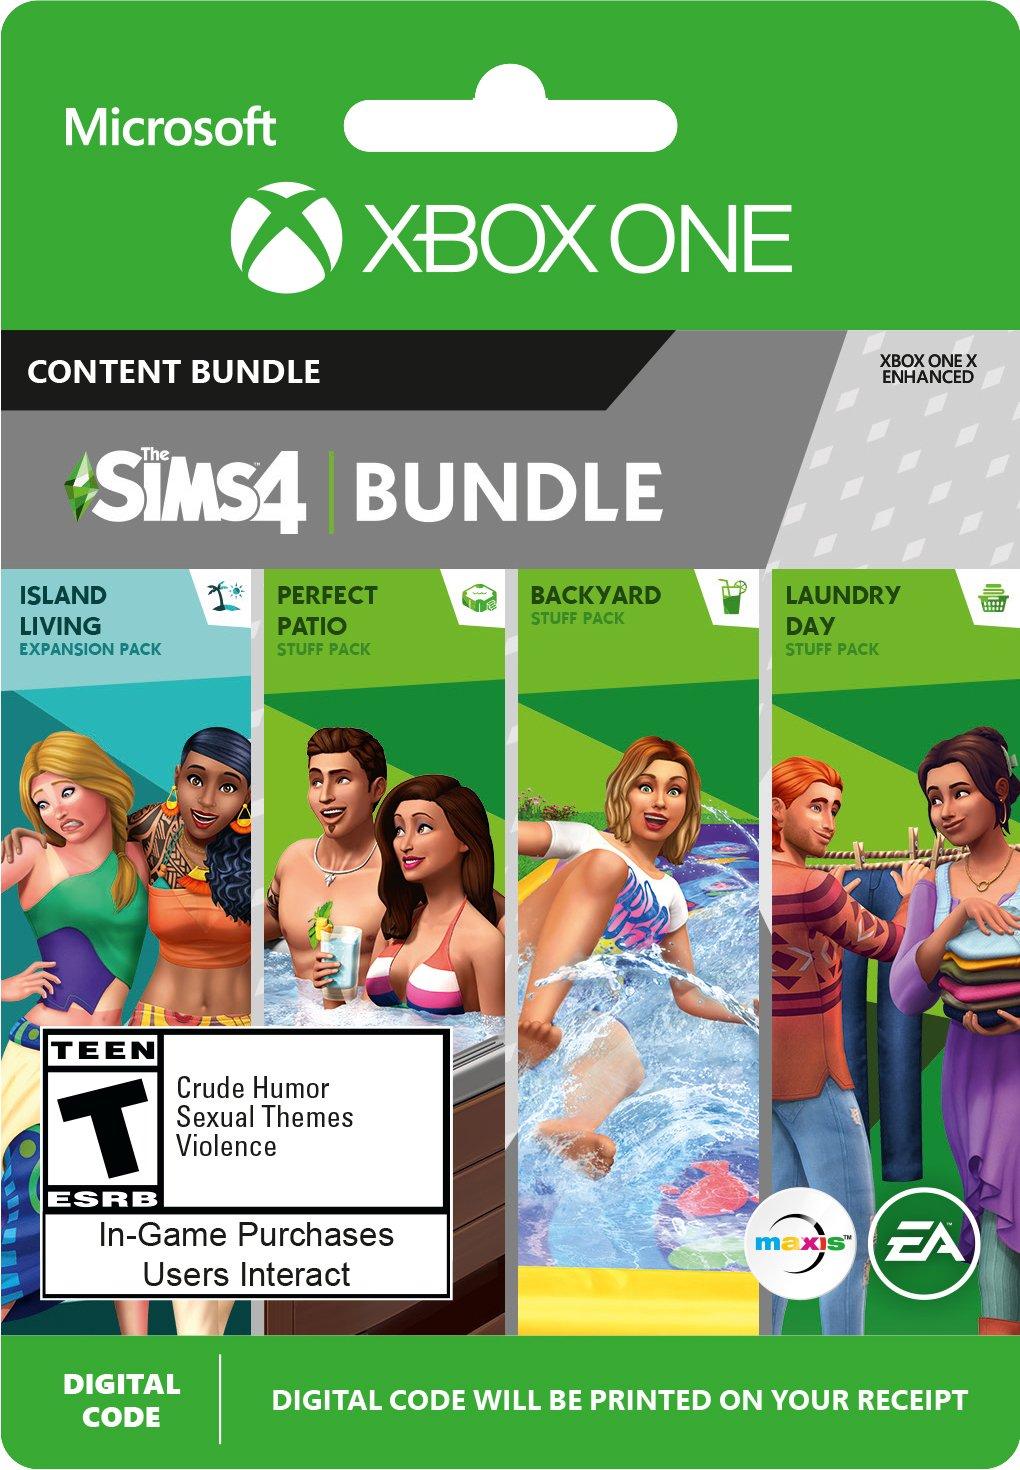 Quick completion The Sims 4 goes free-to-play on Xbox soon